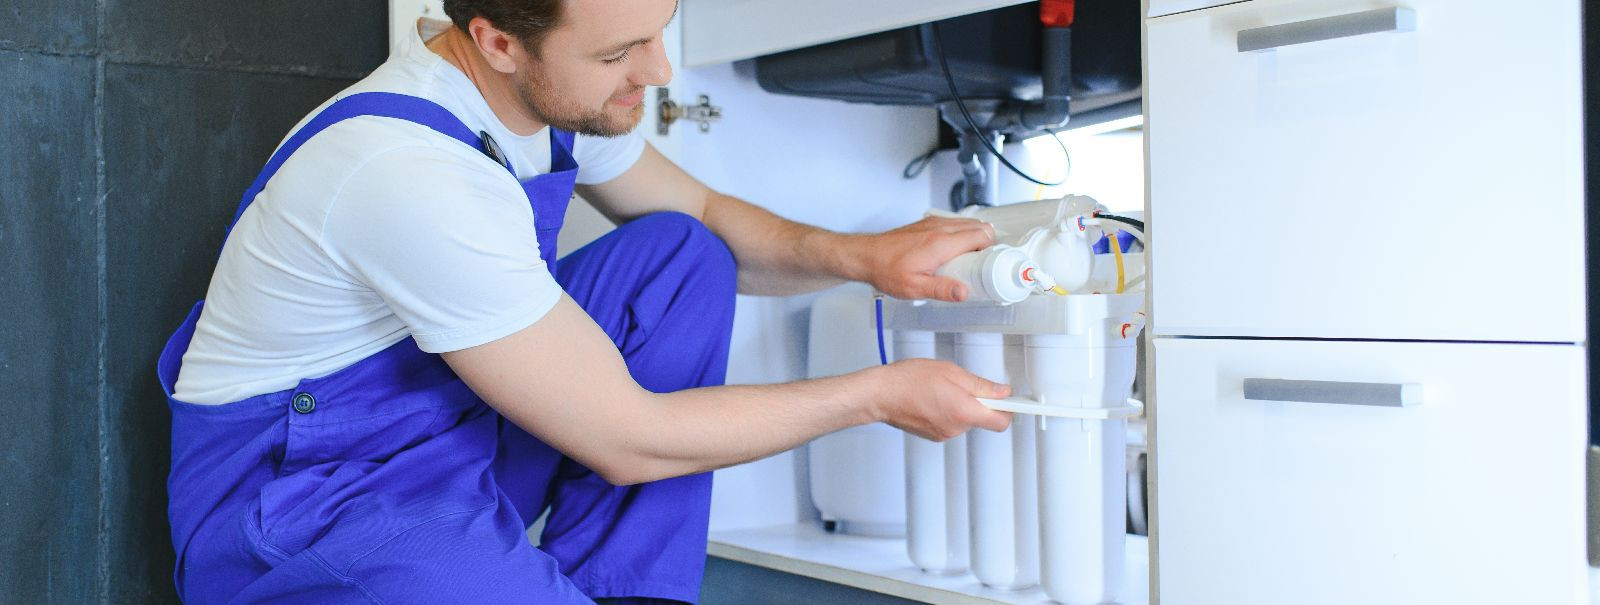 When it comes to plumbing emergencies, time is of the essence. Homeowners and businesses in Tallinn and Harju County understand the importance of addressing plu